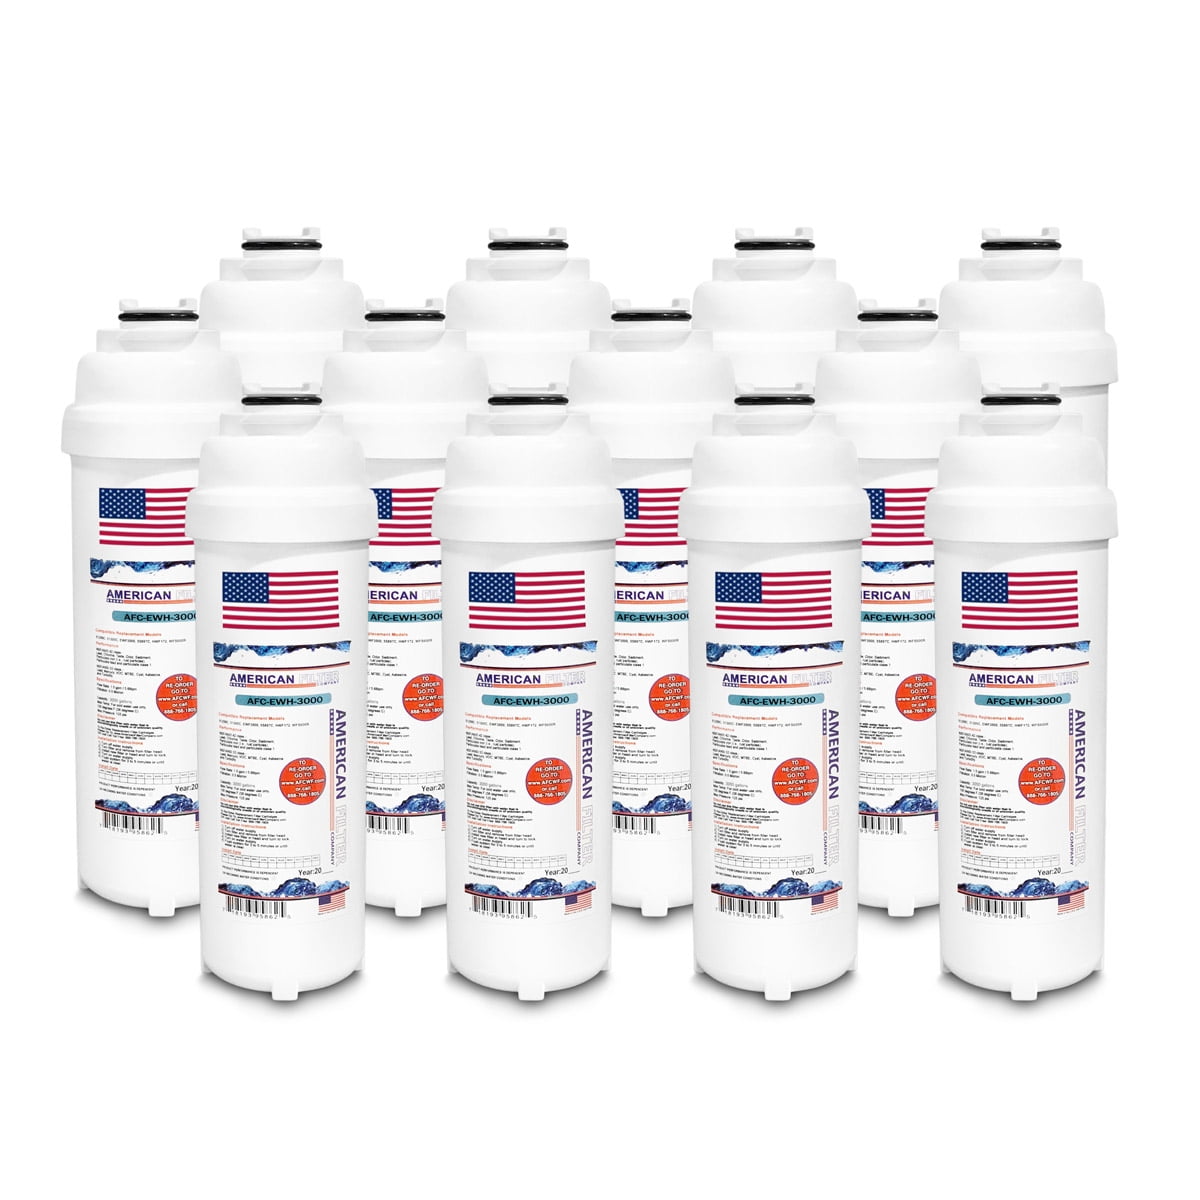 American Filter Company WaterSentry® LZWSGRN8PK Comparable Water Fountain Filters (made by AFC™ Model number AFC-EWH-3000) Made in U.S.A - 12 Filters